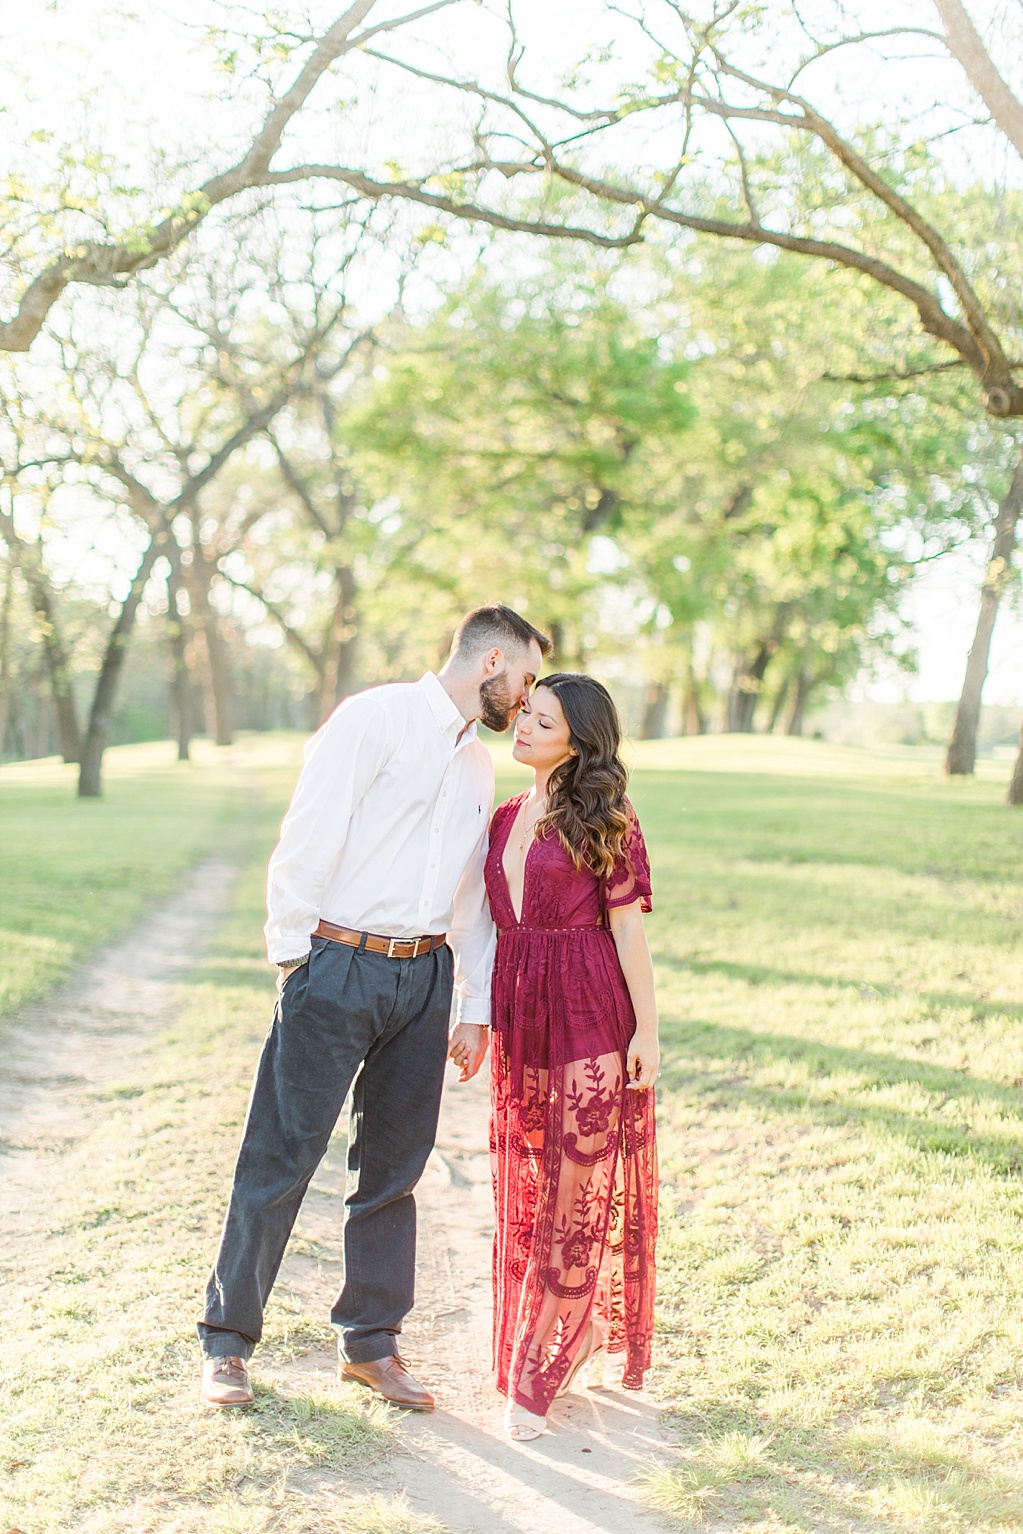 Eagle Dancer Ranch Engagement Photo Session in Boerne, Texas by Allison Jeffers Photography 0028